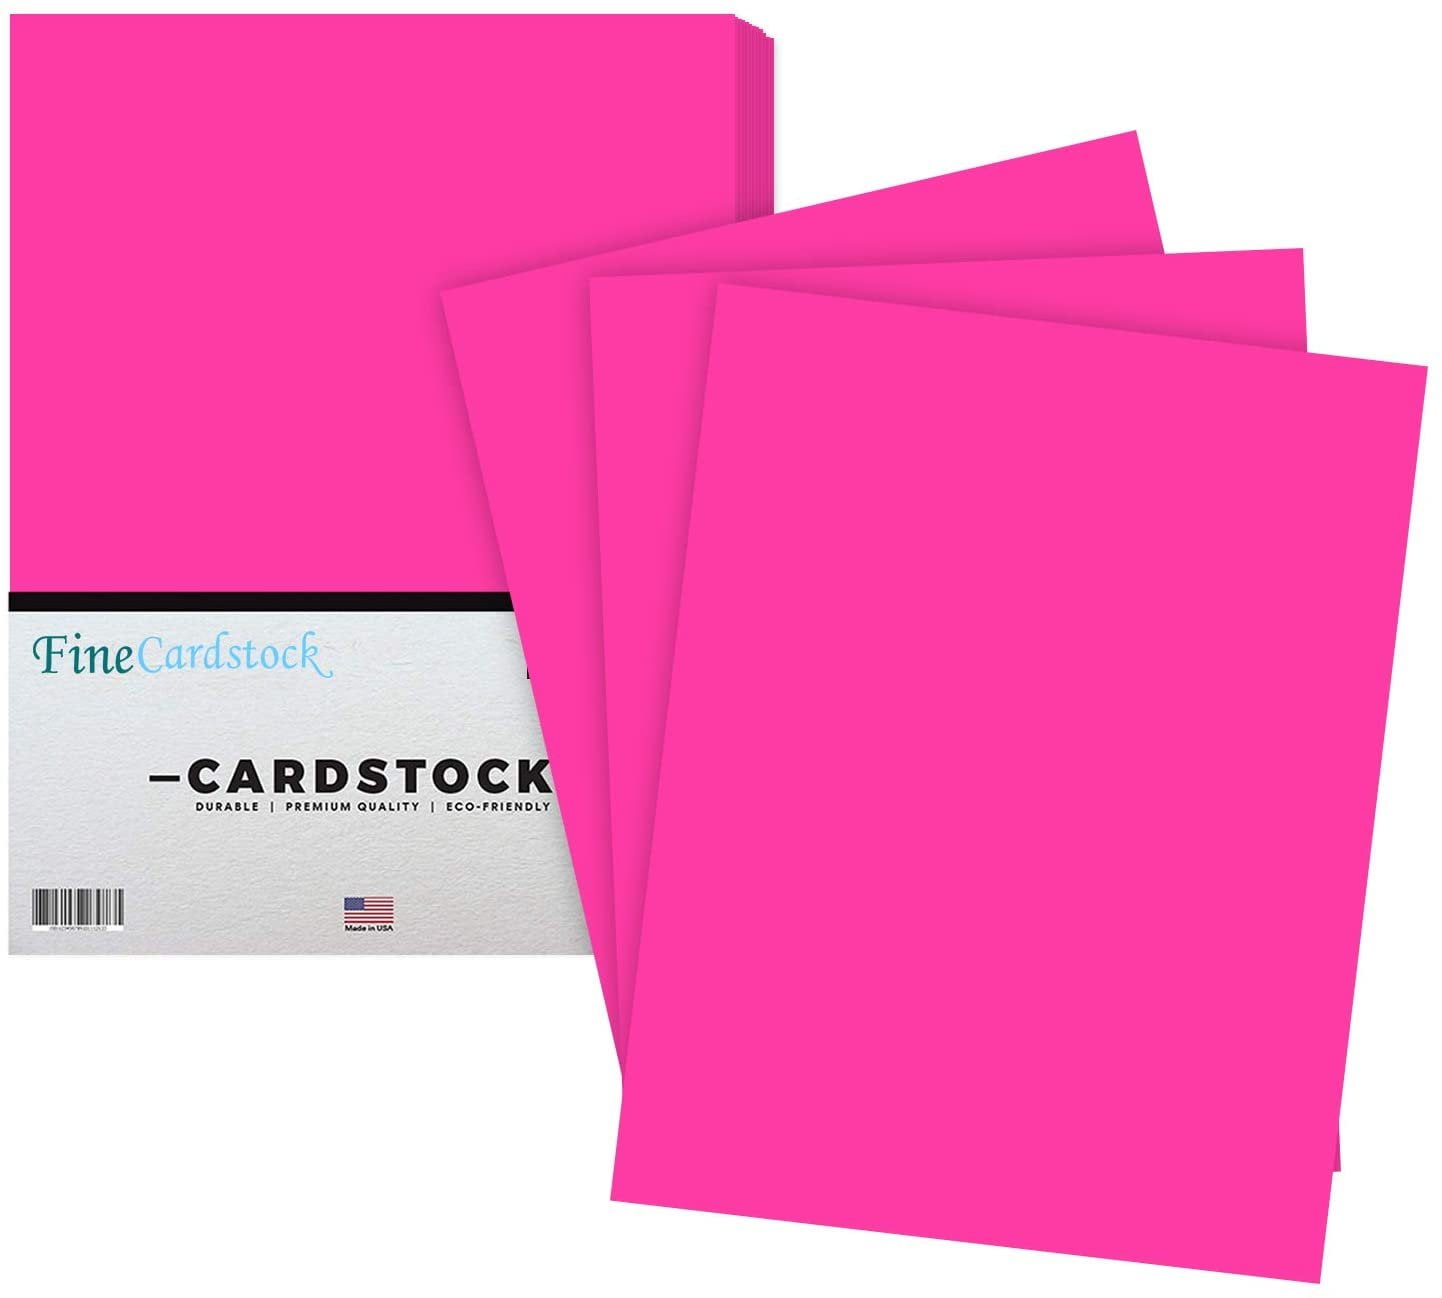  White Cardstock - For School Supplies, Crafts, Kids Art  Projects, Invitations, etc – Thick 65lb Card Stock, 11 x 17 inch,  Heavyweight Hard Cover Stock (176 gsm) 98 Brightness, 50